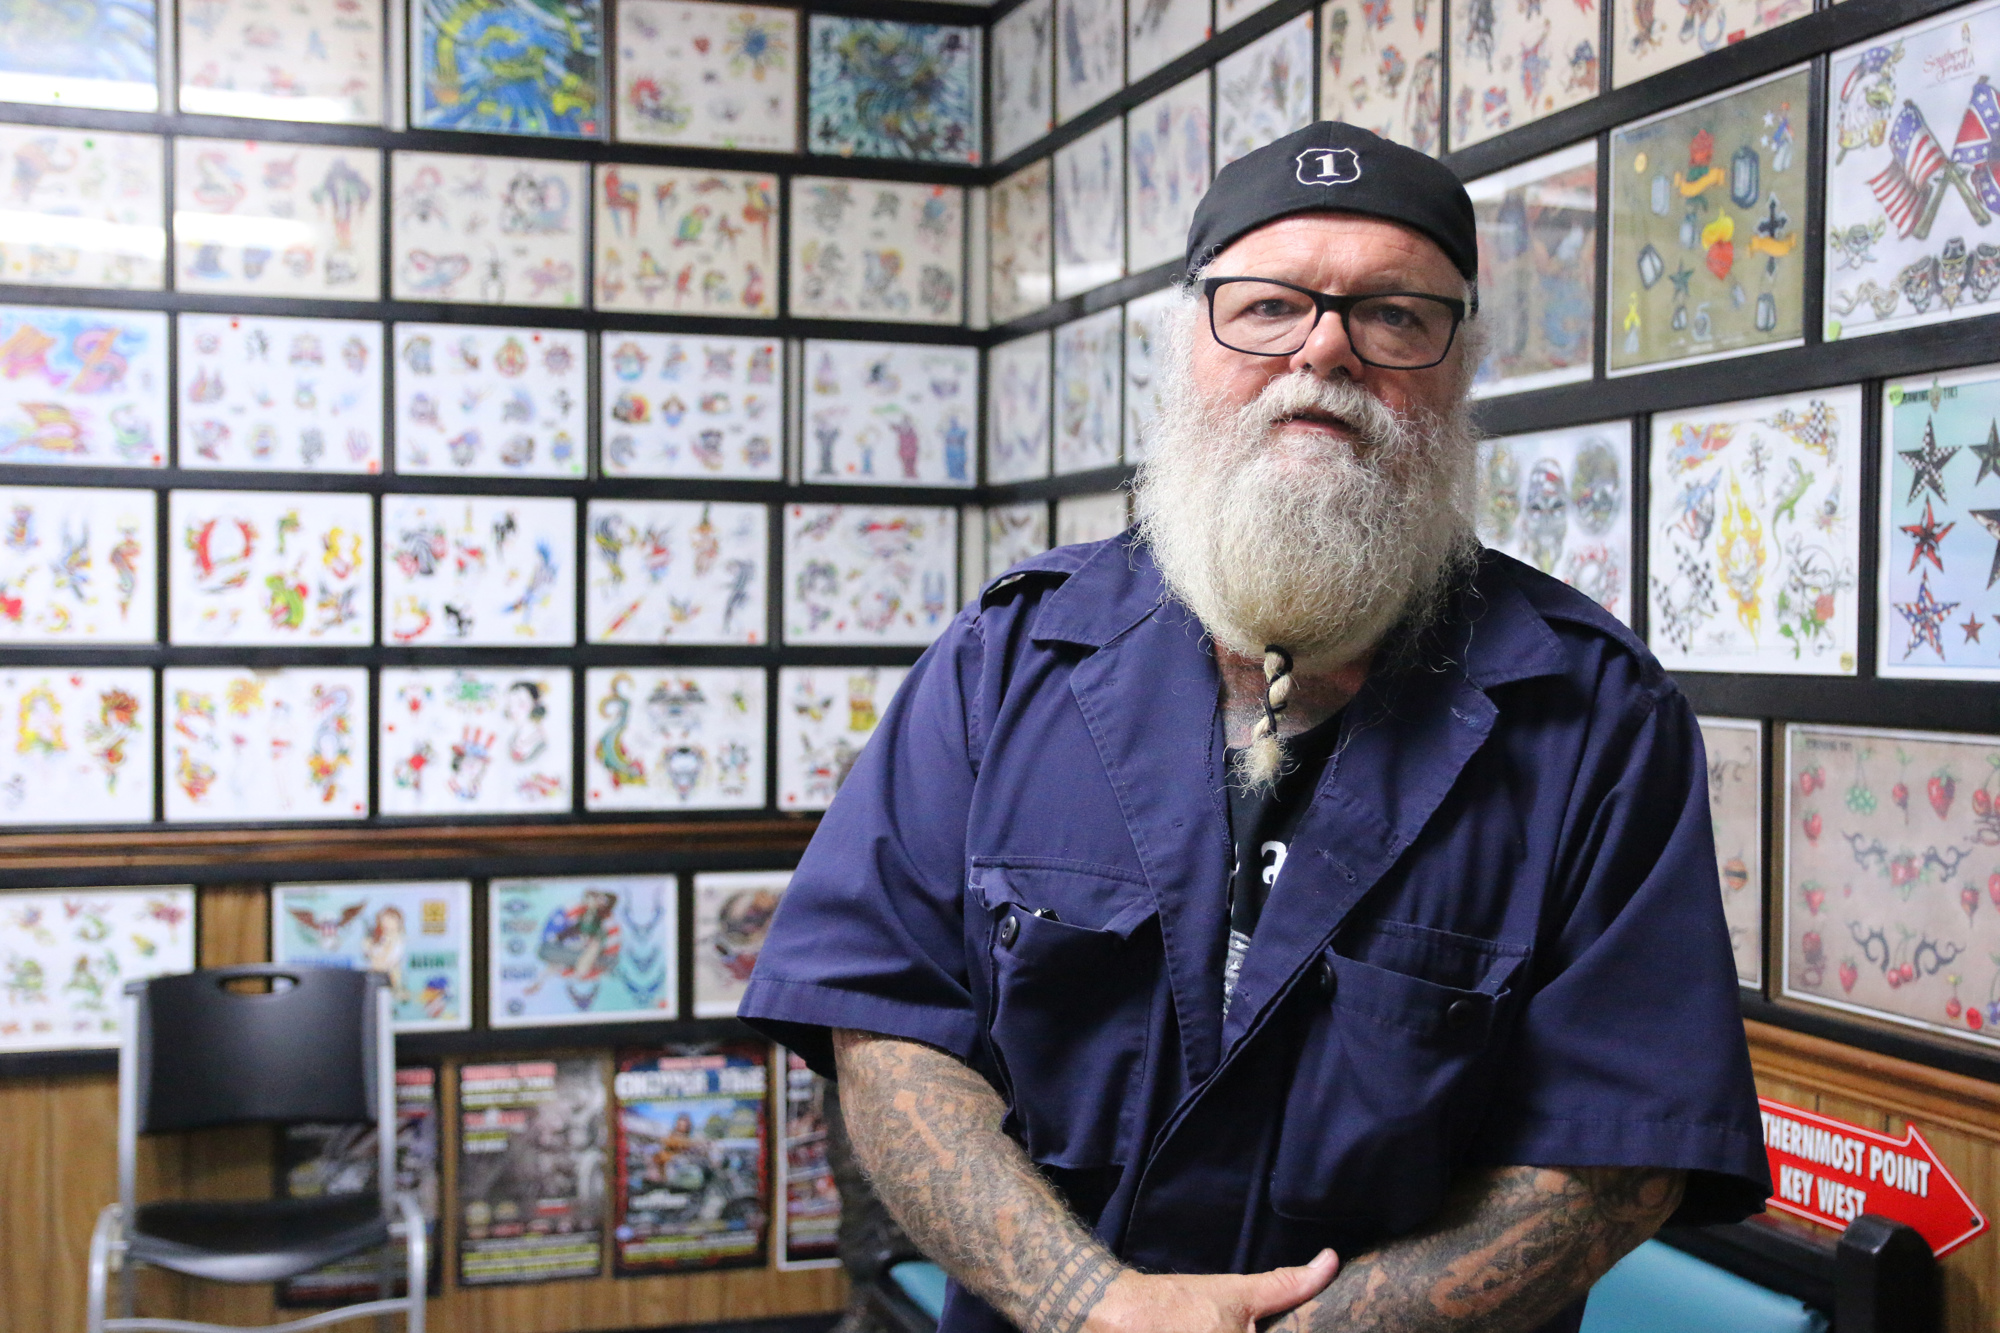 Willie Perry has owned his tattoo parlor since the 90s. Photo by Jarleene Almenas